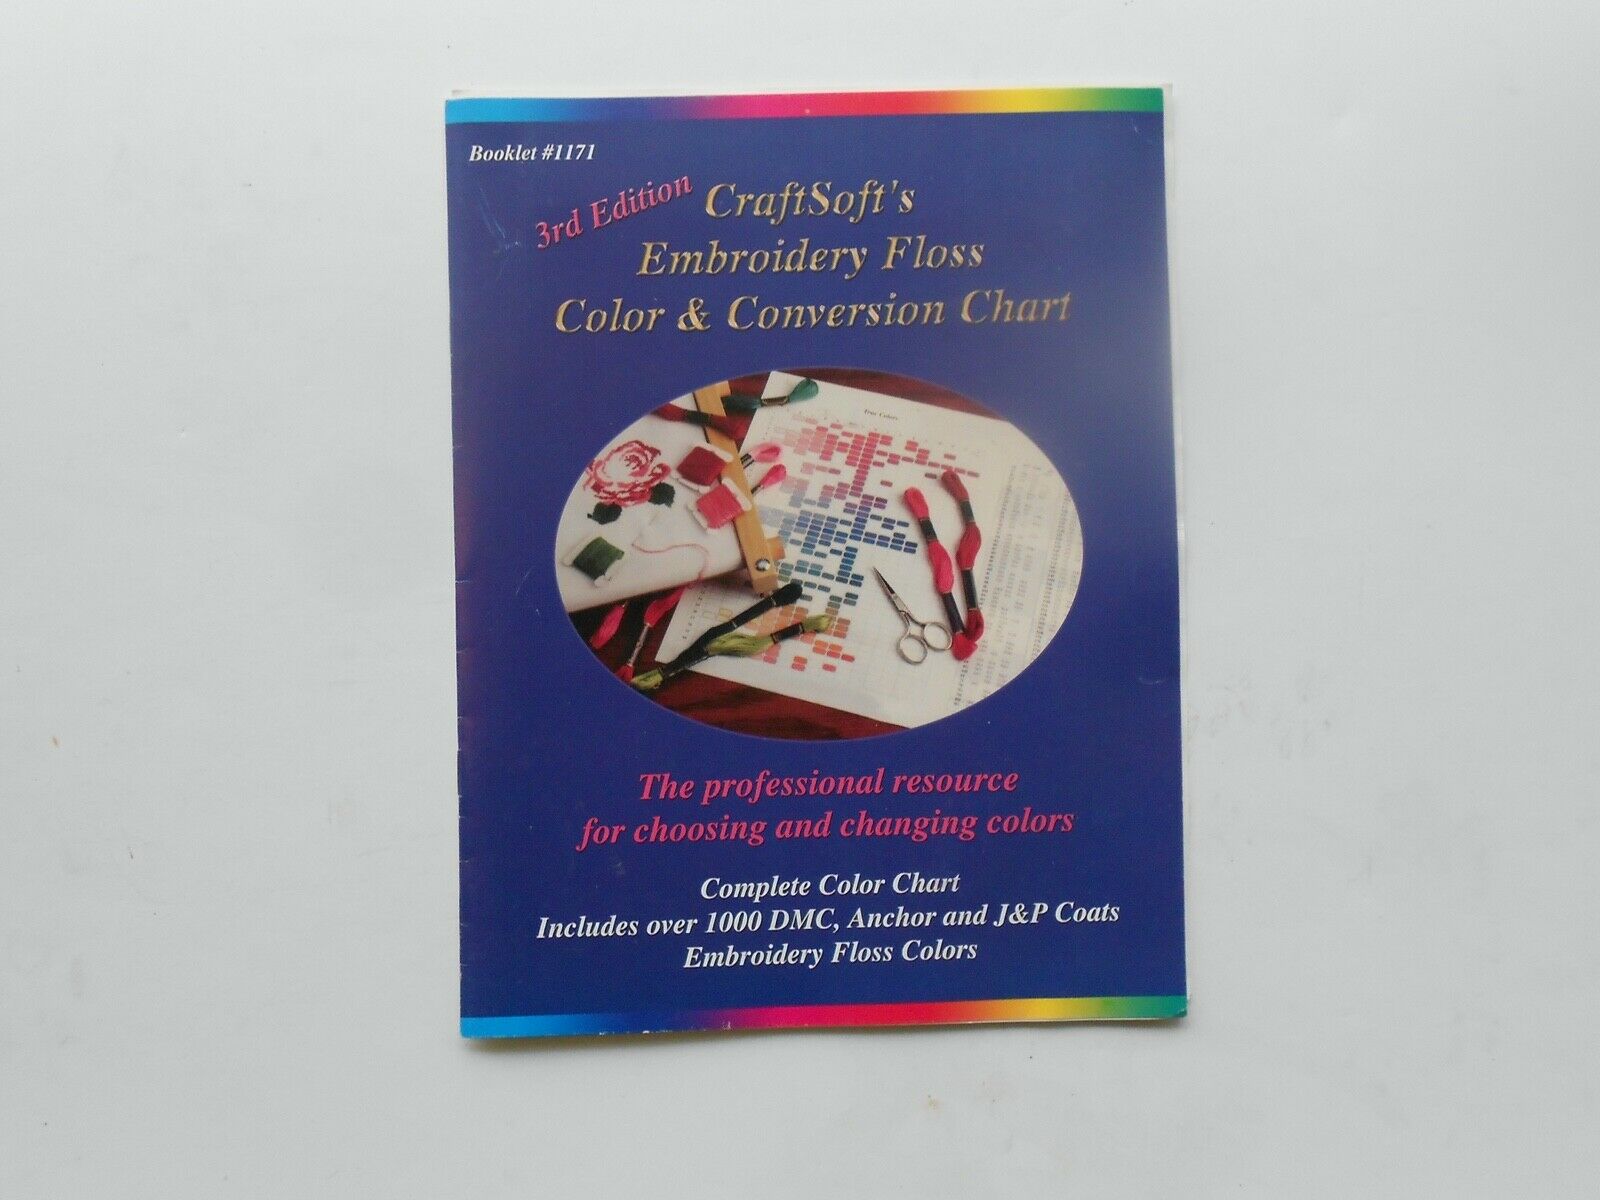 Craftsoft's Embroidery Floss Color And Conversion Chart~~3rd Edition